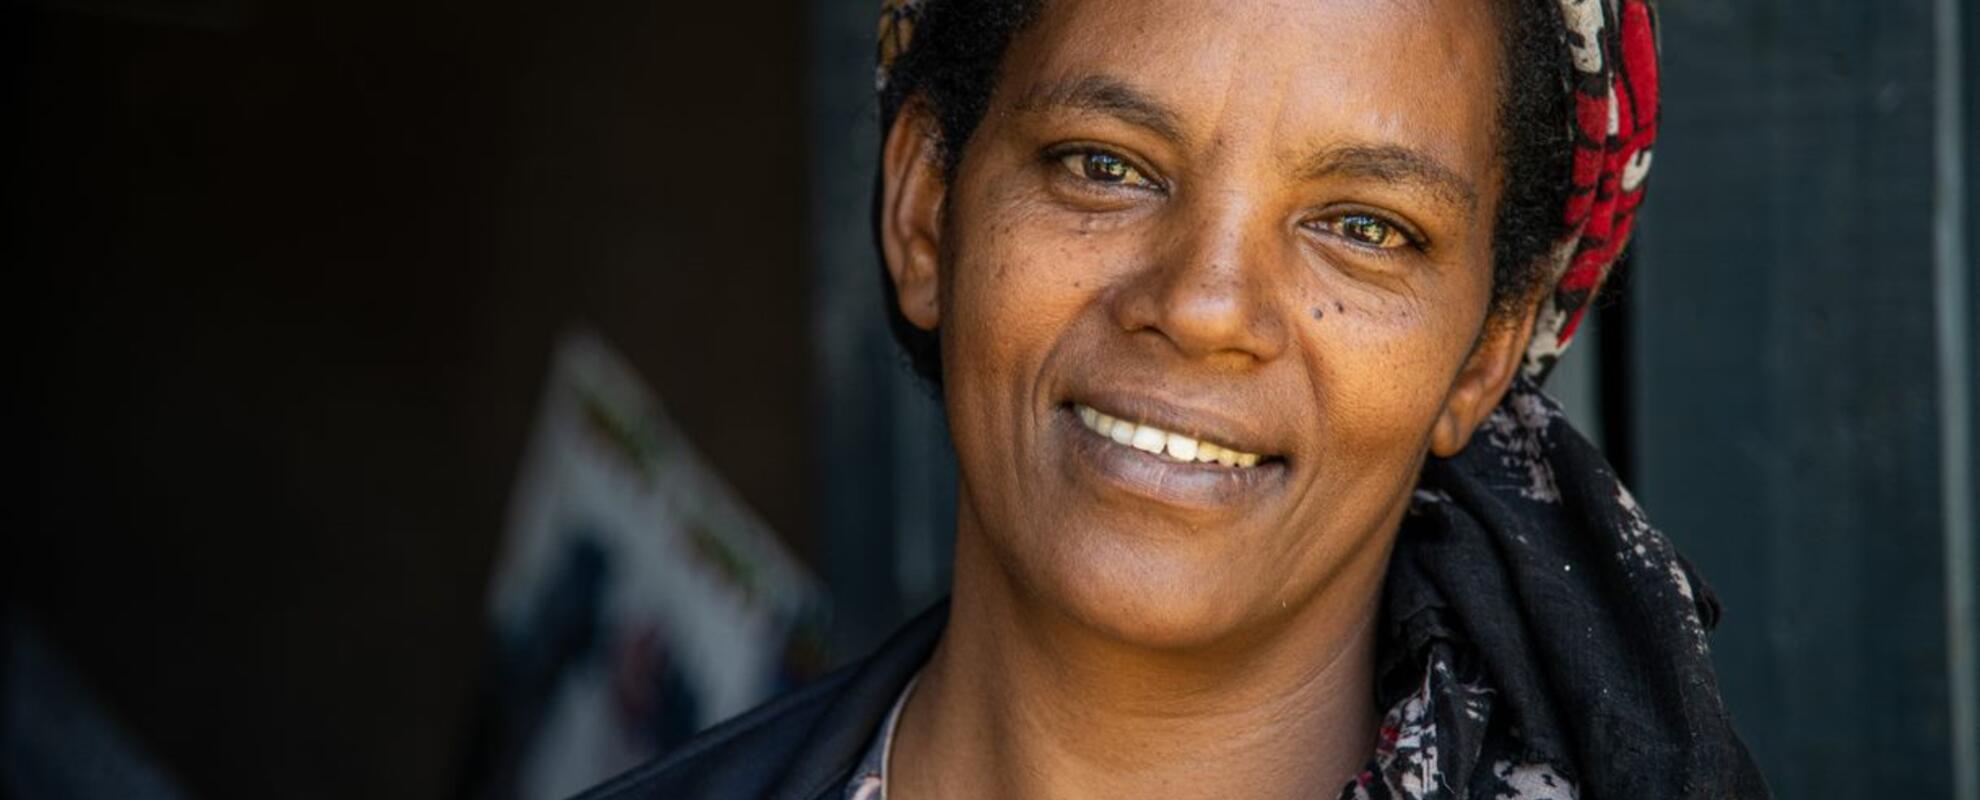 Ethiopia: Women making a difference on the front line of dangerous zoonotic disease spread